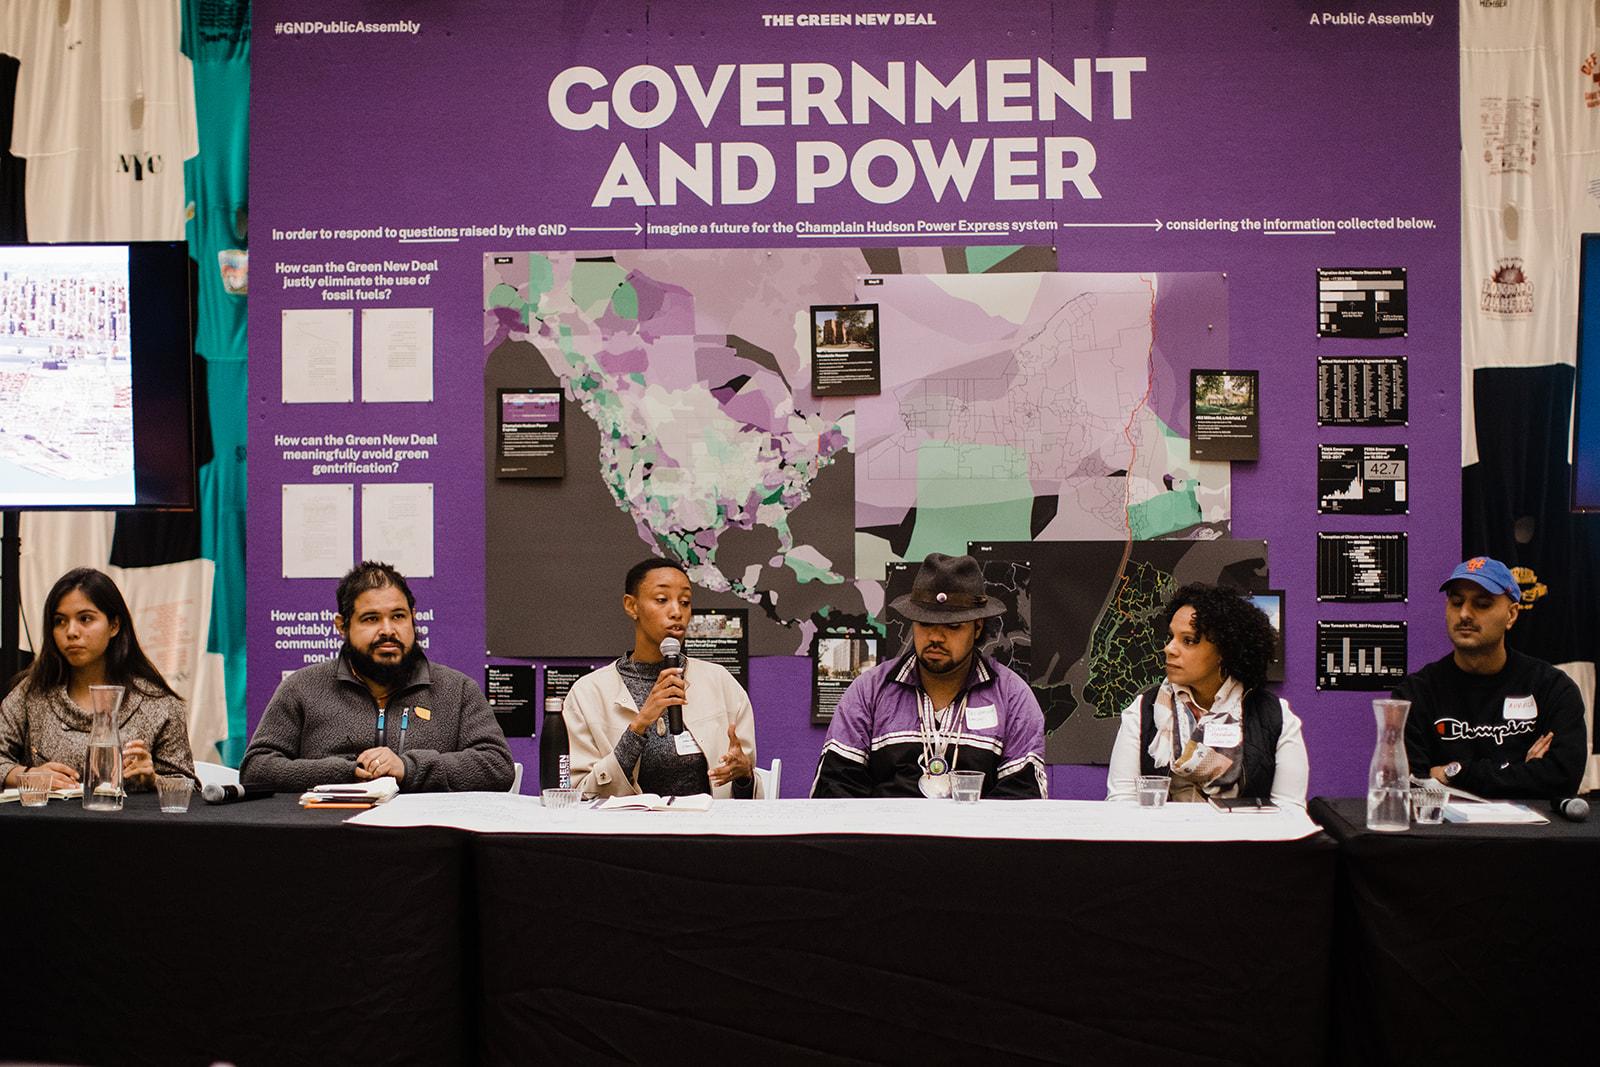 Six panelists sit side-by-side at a table during the "Government and Power" panel(Corey Torpie)